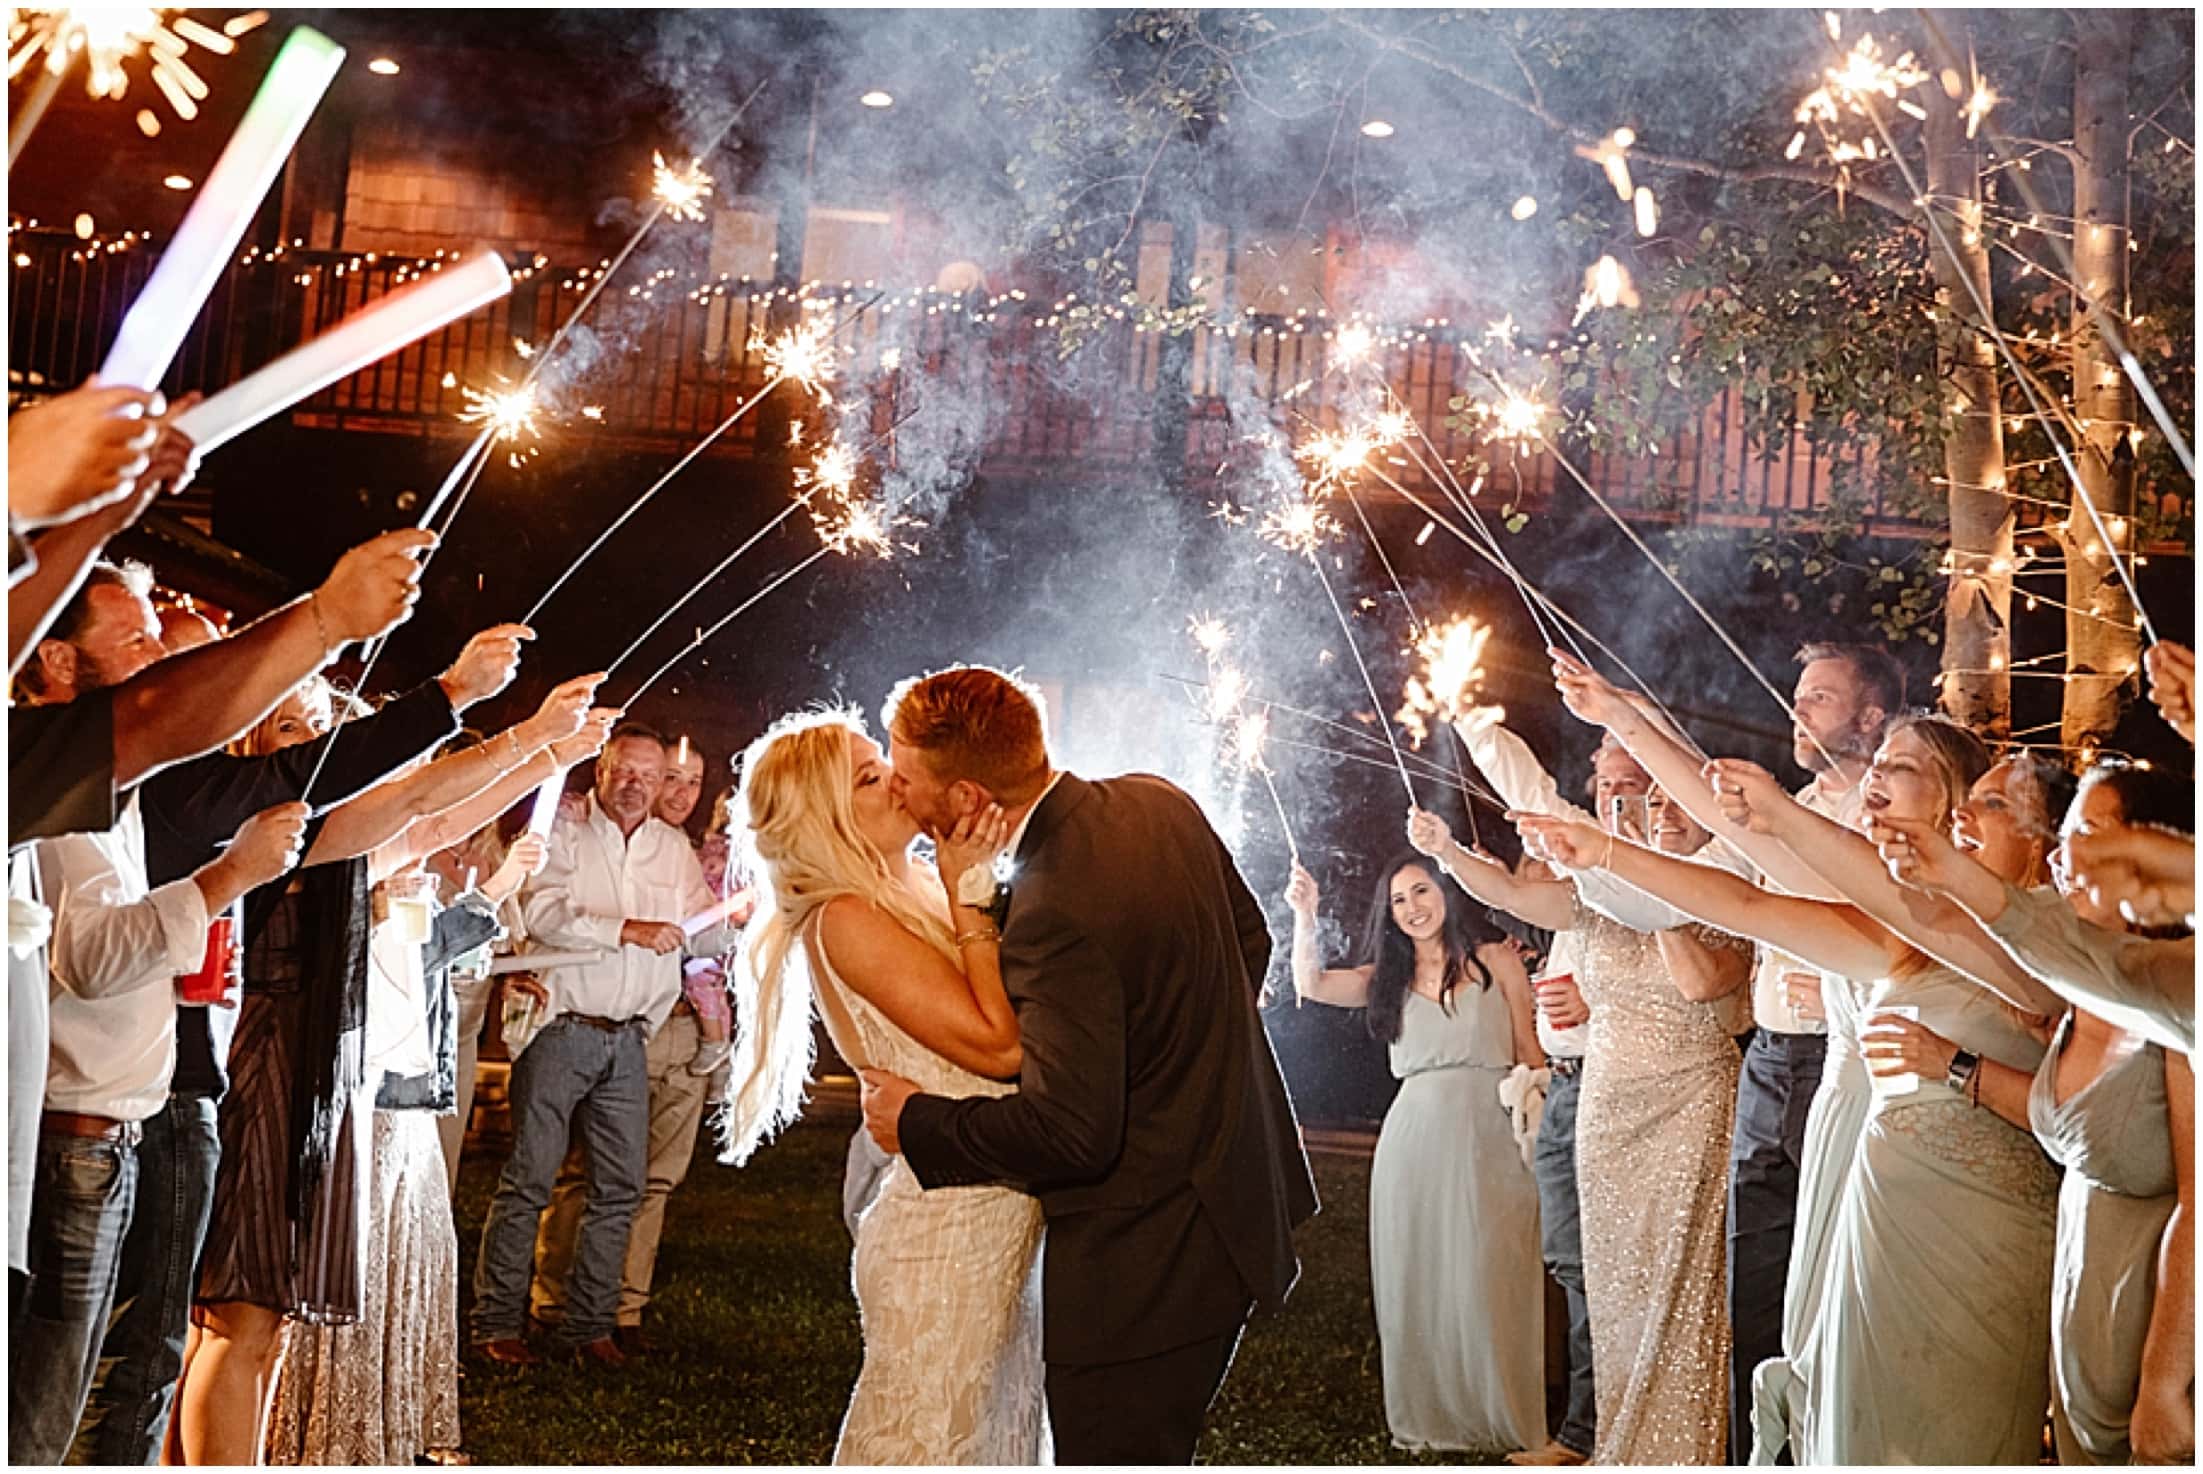 fireworks at wedding, sparkler exit, bride and groom exit kiss, wedding party holding sparklers, Aspen Lodge, Red River New Mexico, Red River New Mexico Wedding, Weddings in New Mexico, Destination mountain wedding, destination mountain elopement, elopements in new mexico, places to get married in new mexico, destination elopement photographer, mountain wedding photographer, new mexico wedding photographer, new mexico elopement photographer, brit nicole photography, cabin wedding, new mexico cabin wedding, mountain landscape for wedding, small intimate mountain wedding, small intimate river wedding, wedding photographer in new mexico, junebug weddings, the knot, wedding wire, 41 productions with lindsay gomez, dallas texas bride, DJ Allen Gallegos, Tao Cakes, New Mexico Wedding planner karen kelly, barnes jewelry, Lillian West bridal dress, Lang’s Bridal, enchanted florist wedding flowers, places to get married in texas, texas wedding photographer, texas elopement photographer, forest wedding, forest elopement, wooded area for wedding, wooded elopement, elopement in the woods, amarillo wedding photographer, amarillo elopement photographer